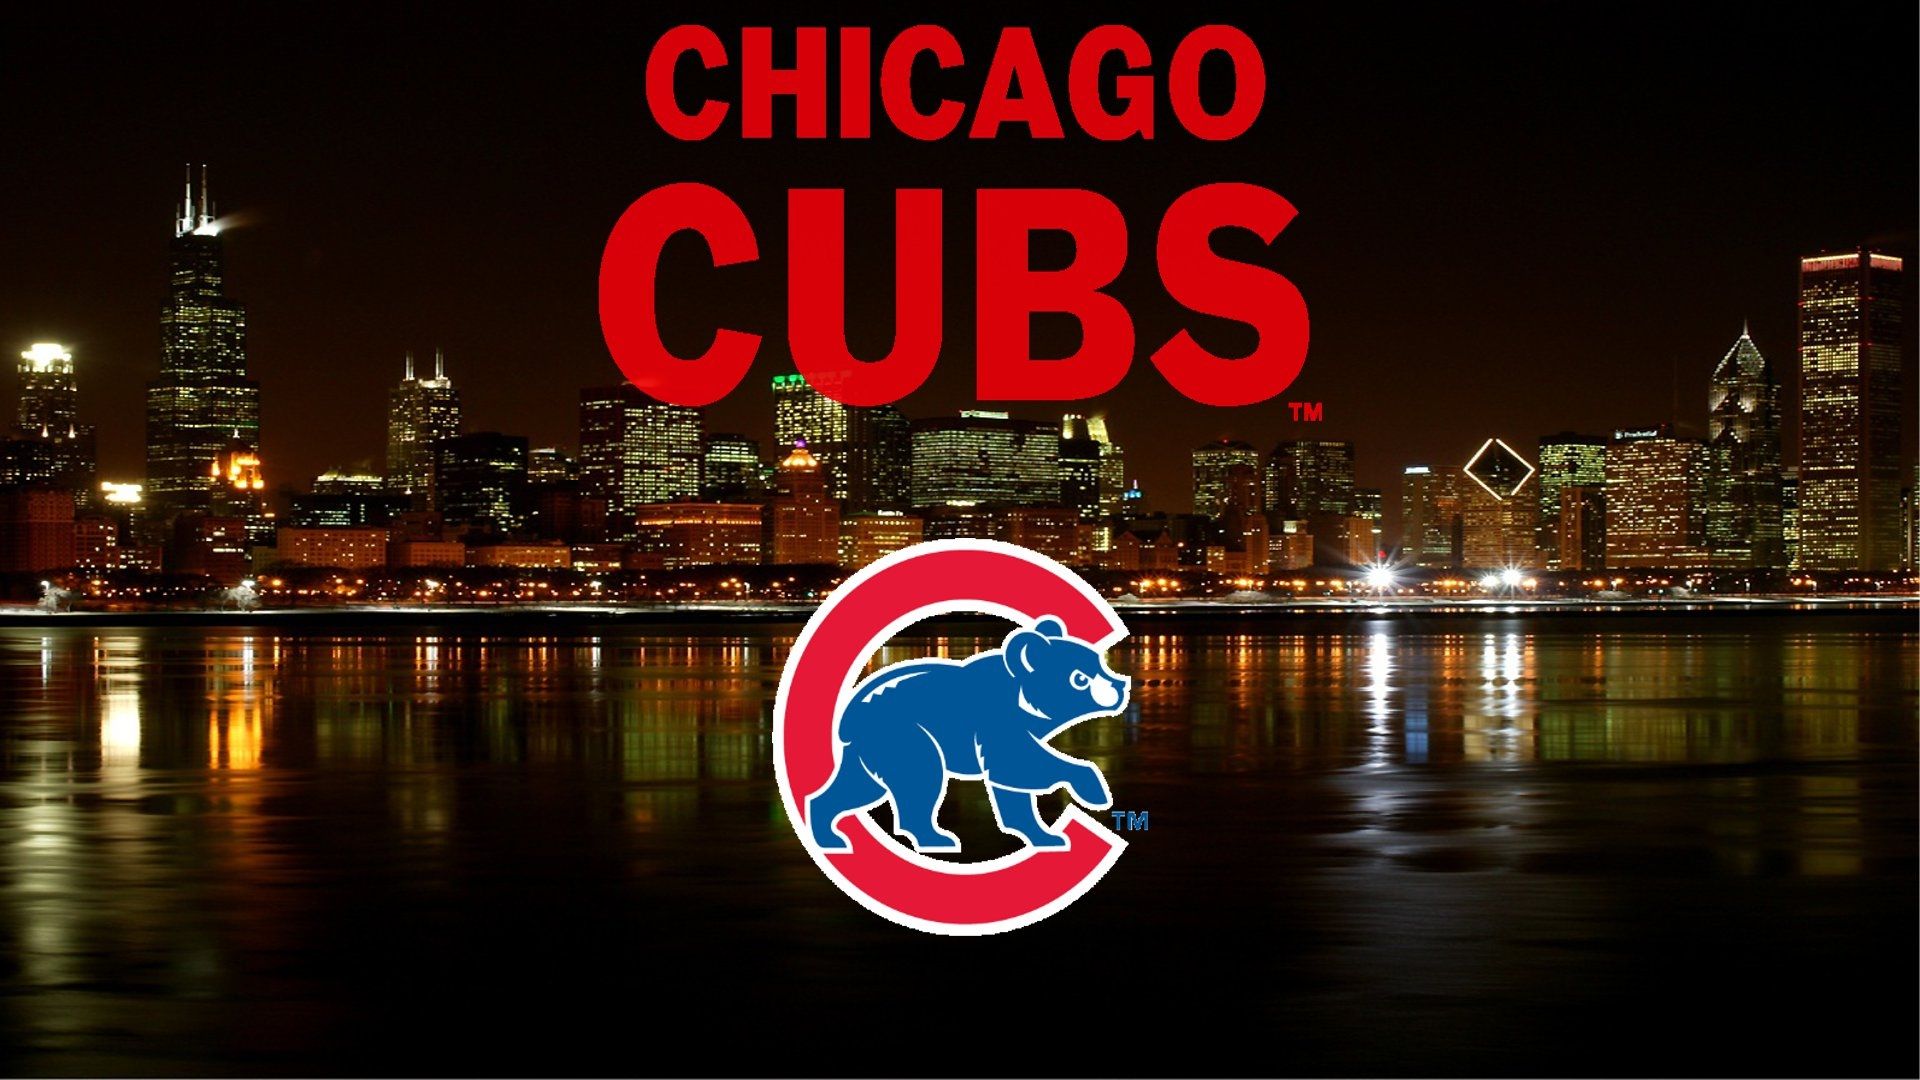 Hey Normal, What Do You Say?. Chicago cubs wallpaper, Cubs wallpaper, Chicago cubs